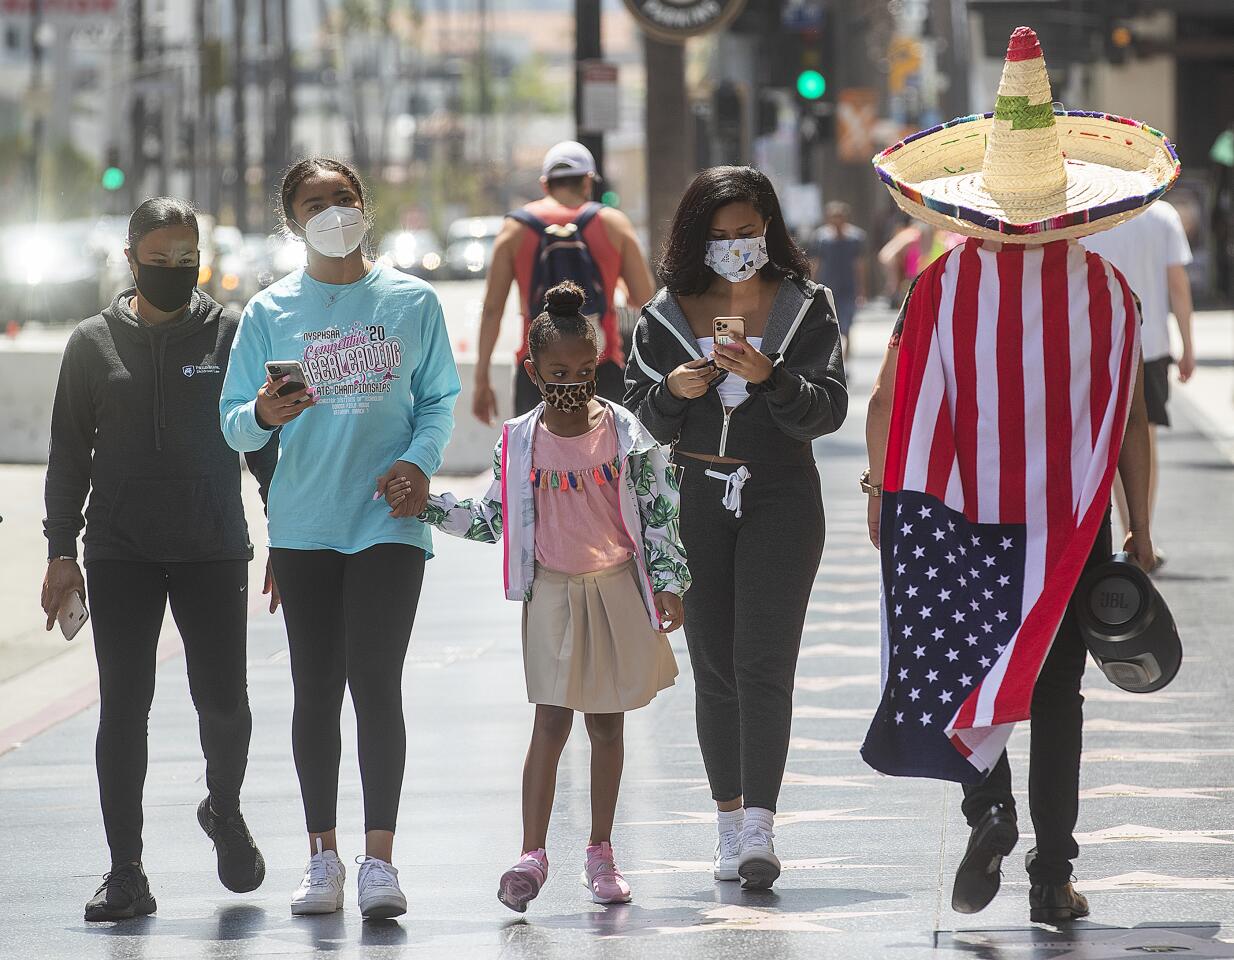 Jair Guido, right, walks with other pedestrians along Hollywood Boulevard in Hollywood.